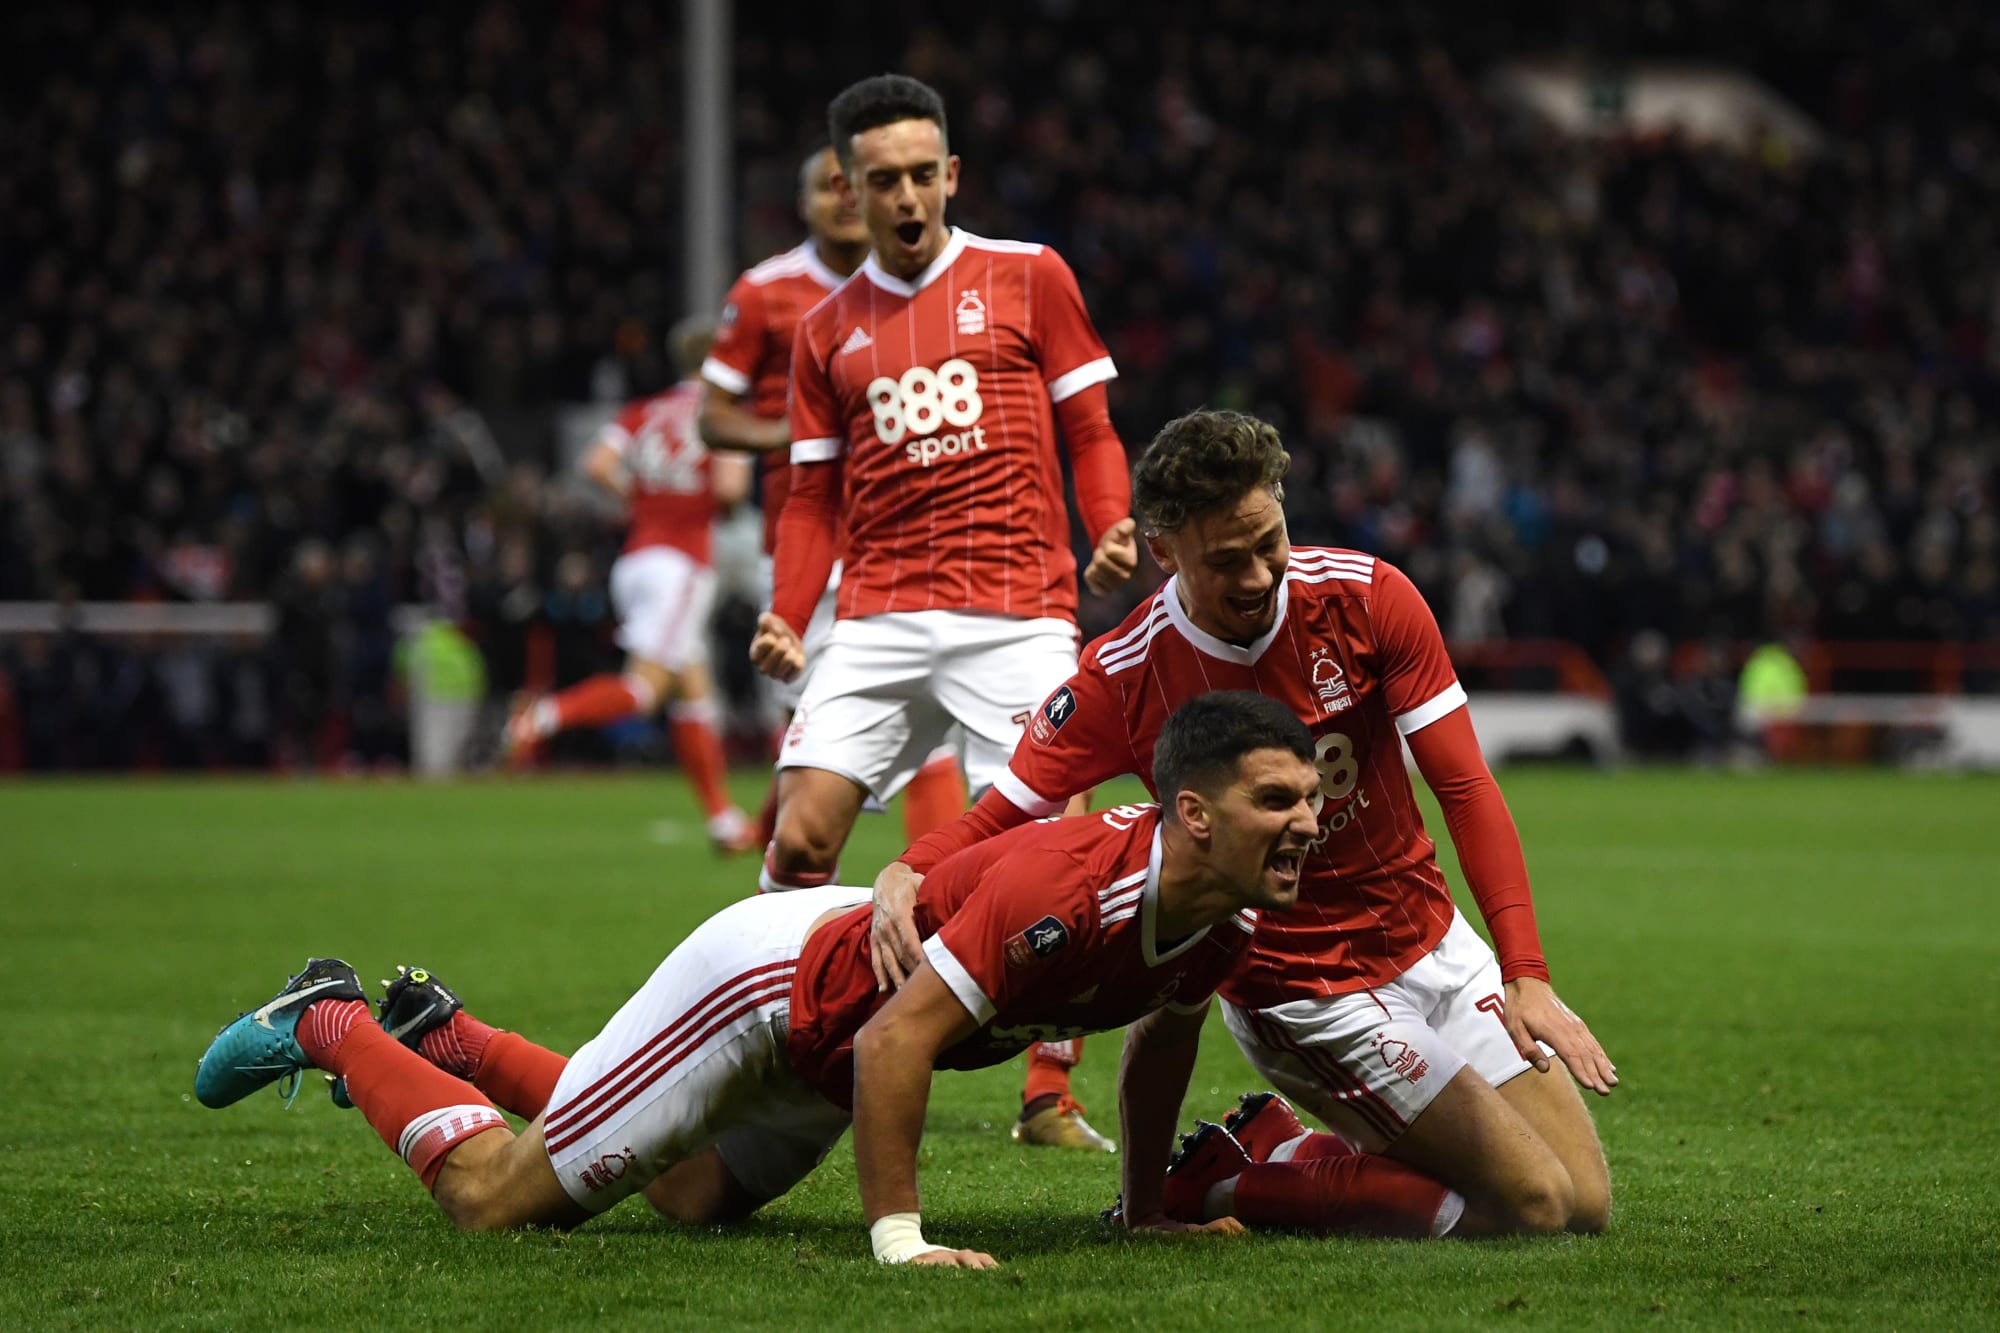 Arsenal Vs Nottingham Forest: Highlights and analysis - Absolute nightmare